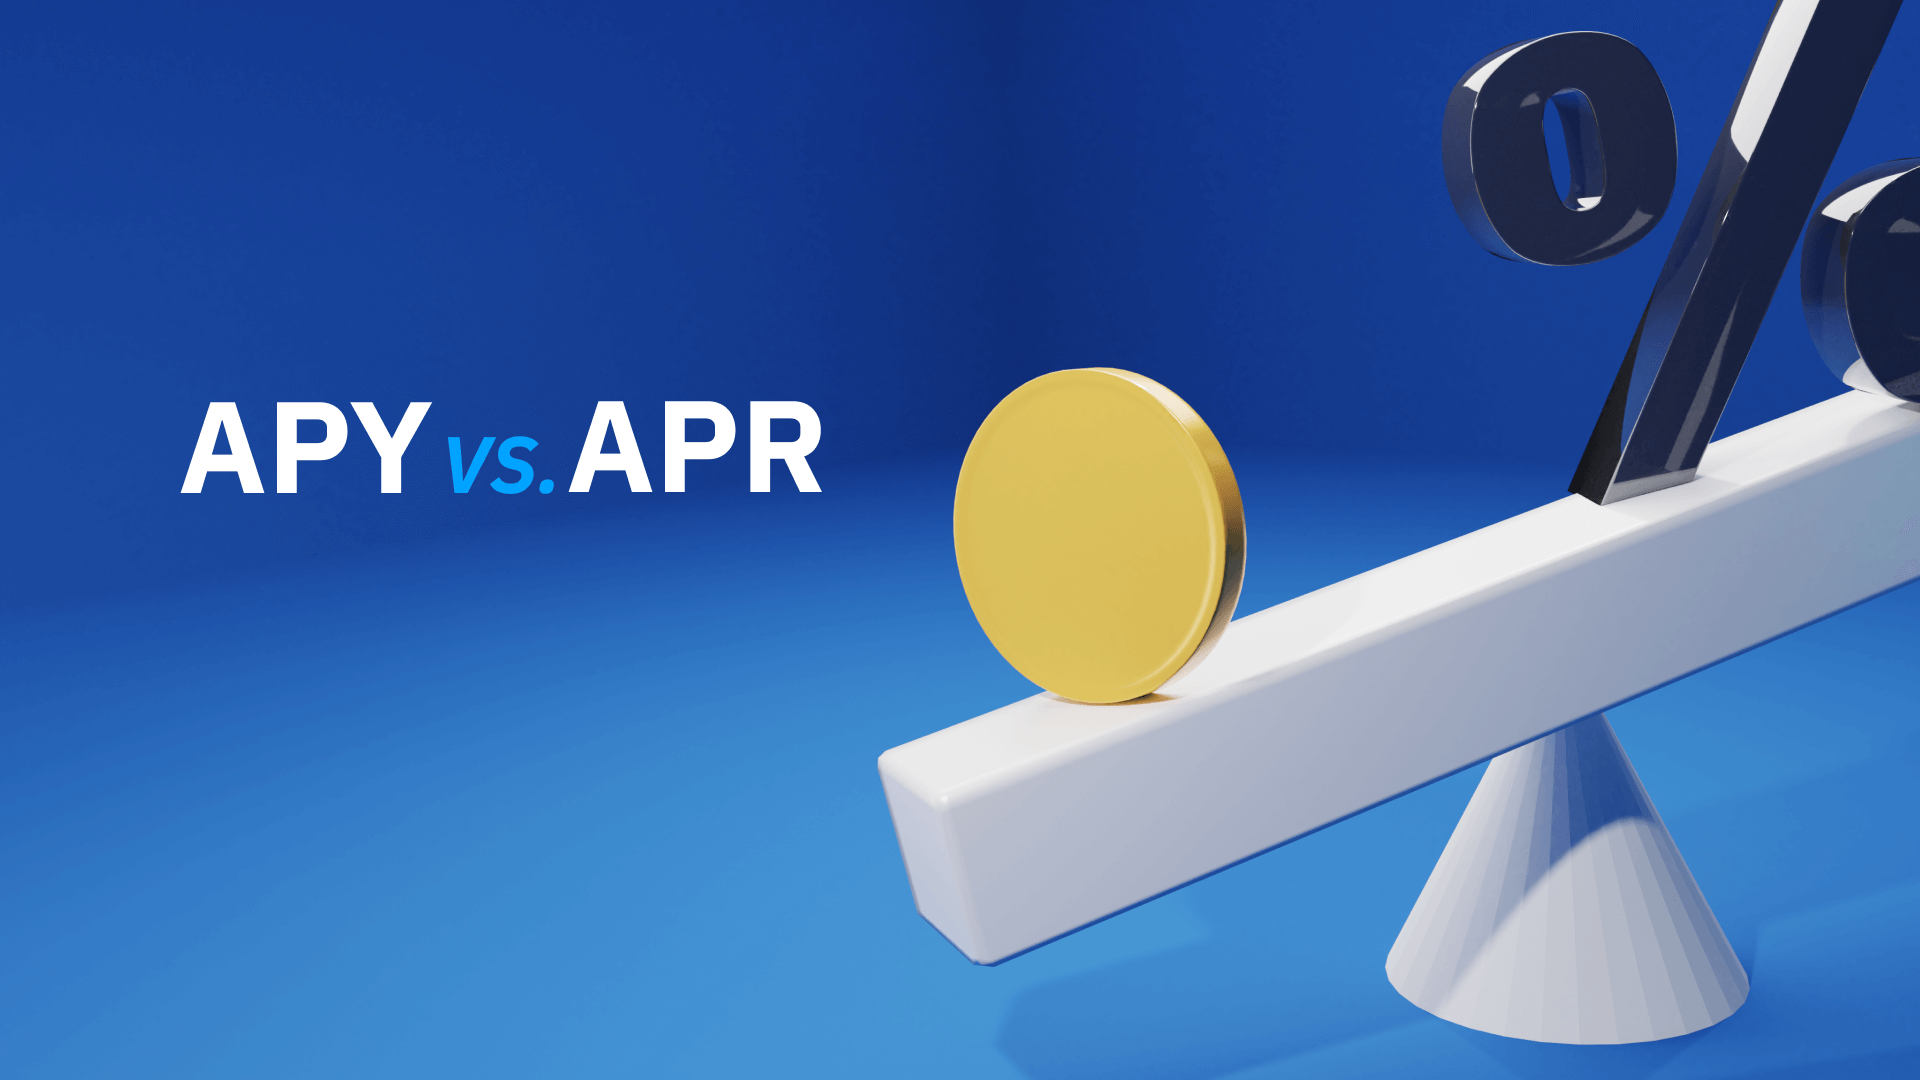 What are APY and APR?